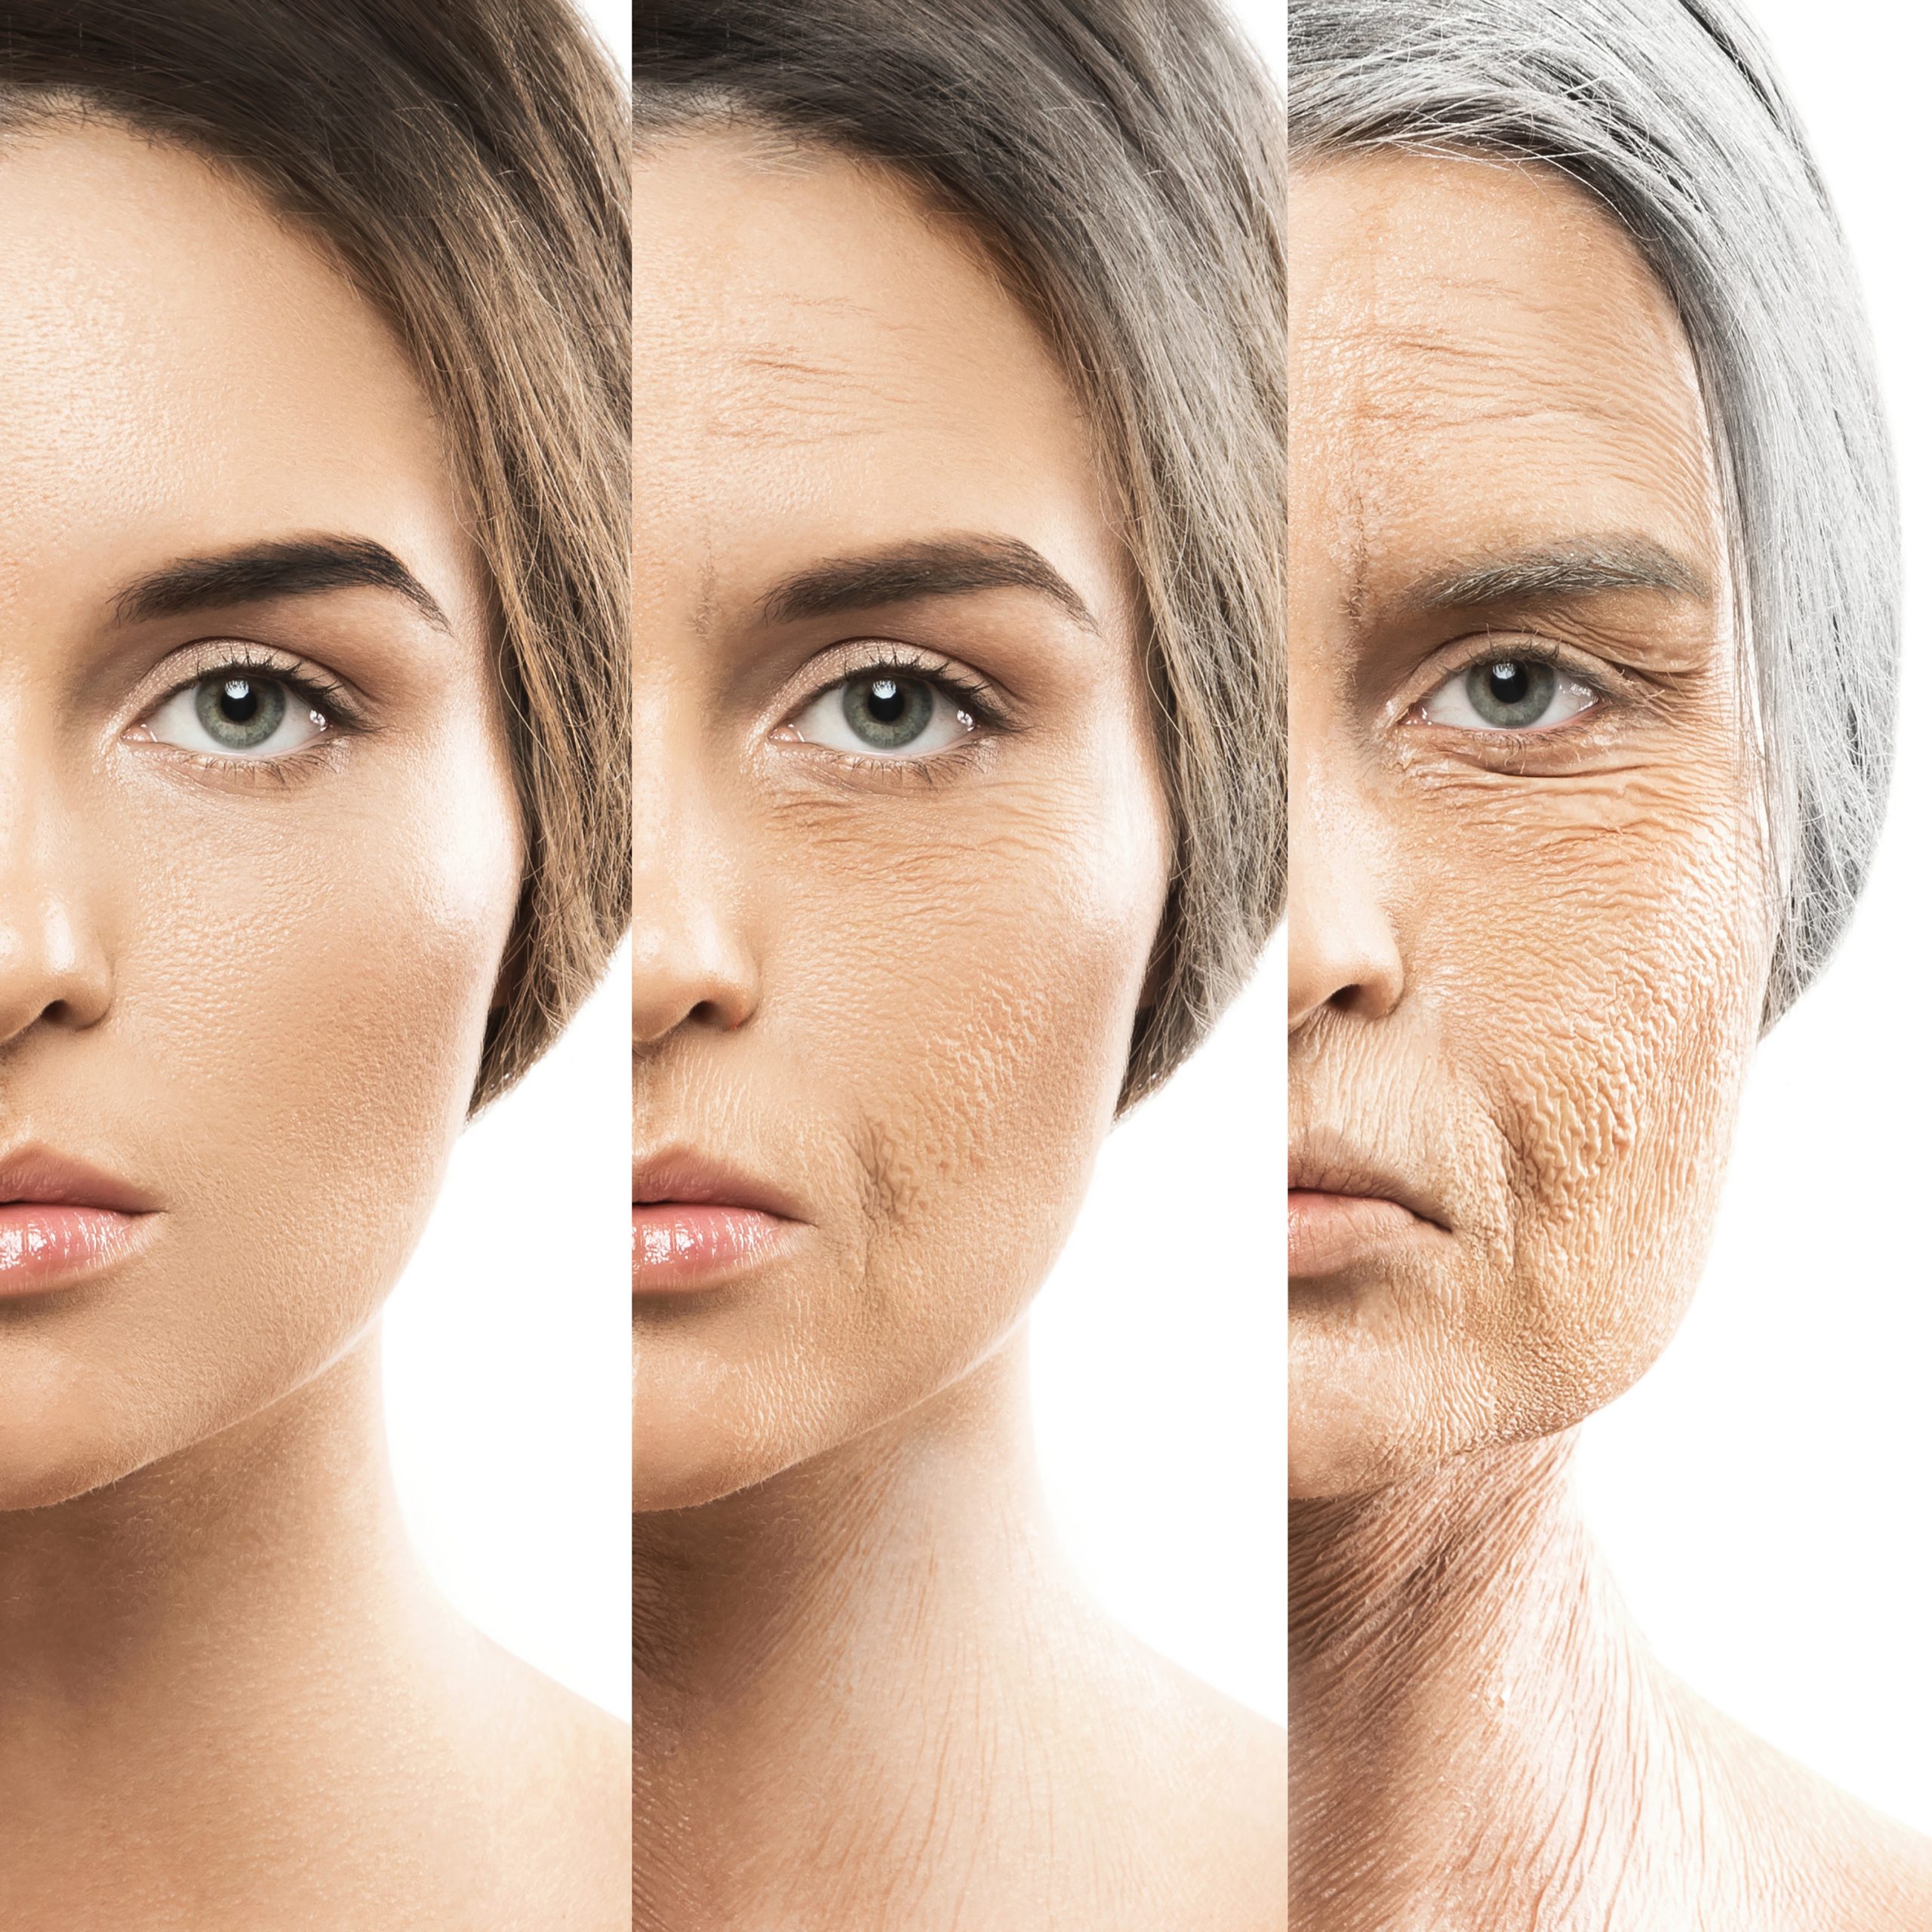 women aging images